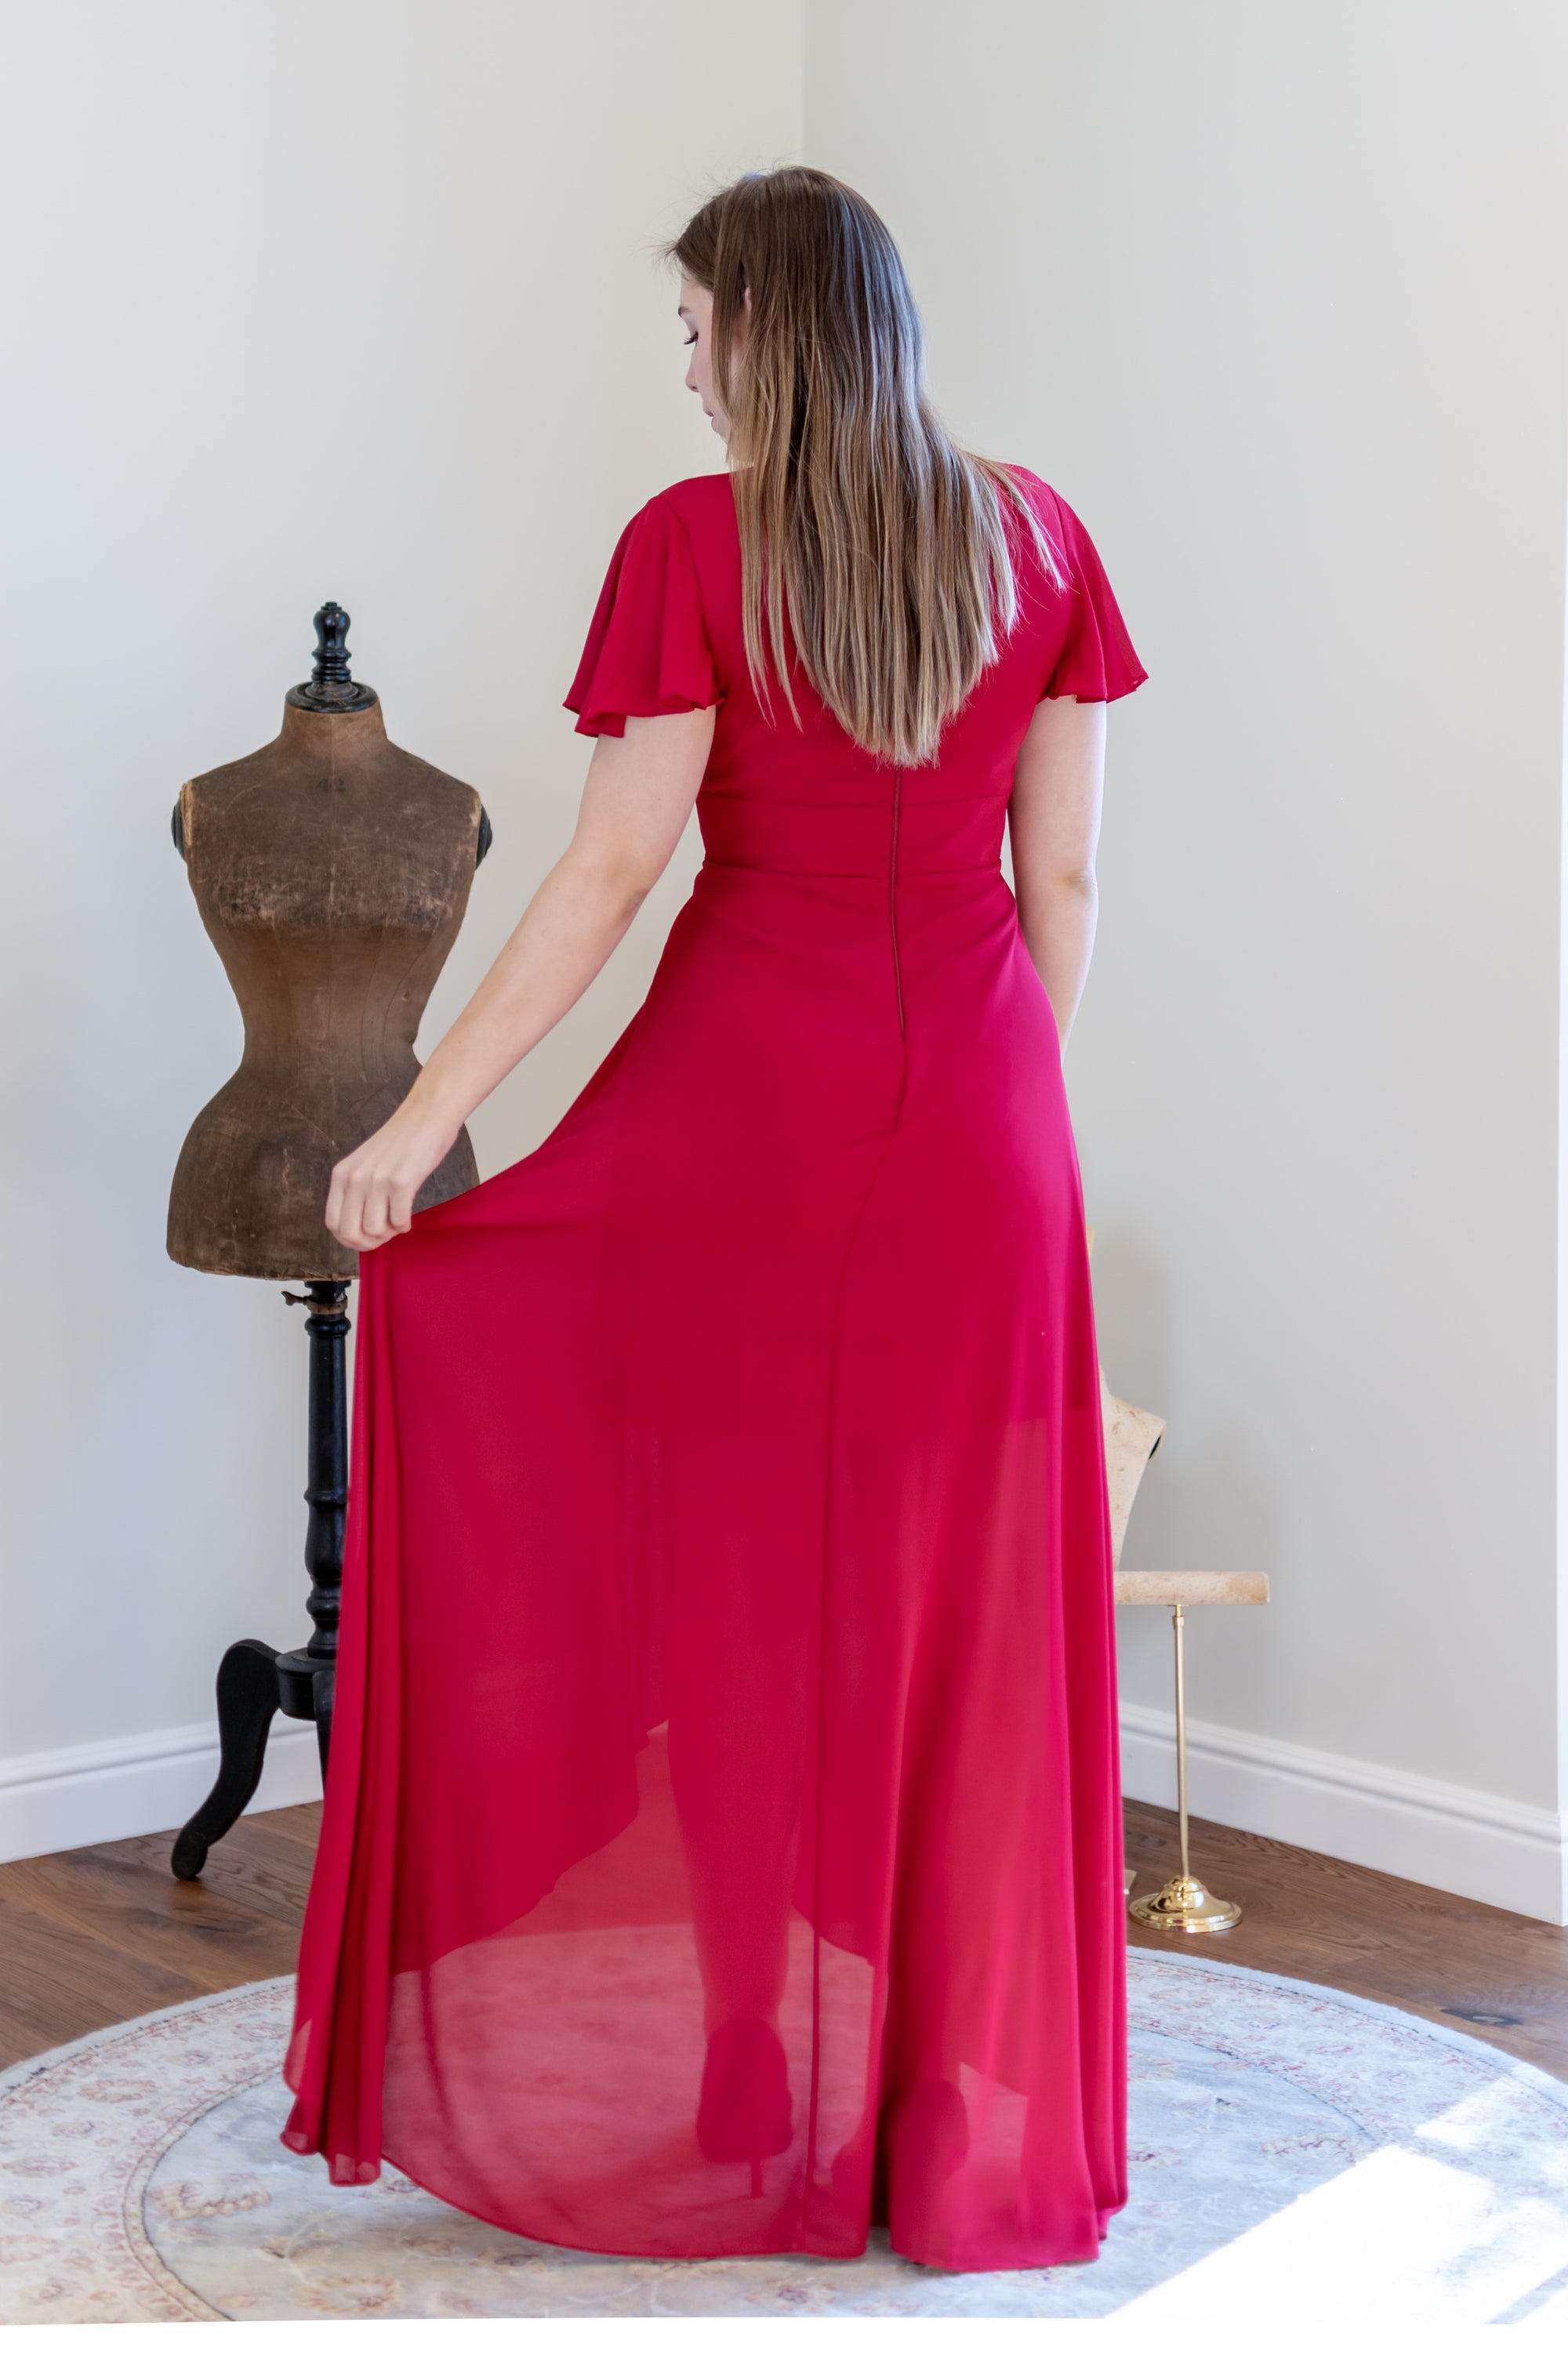 Waterfall Dress Queen Size - Cerise Red